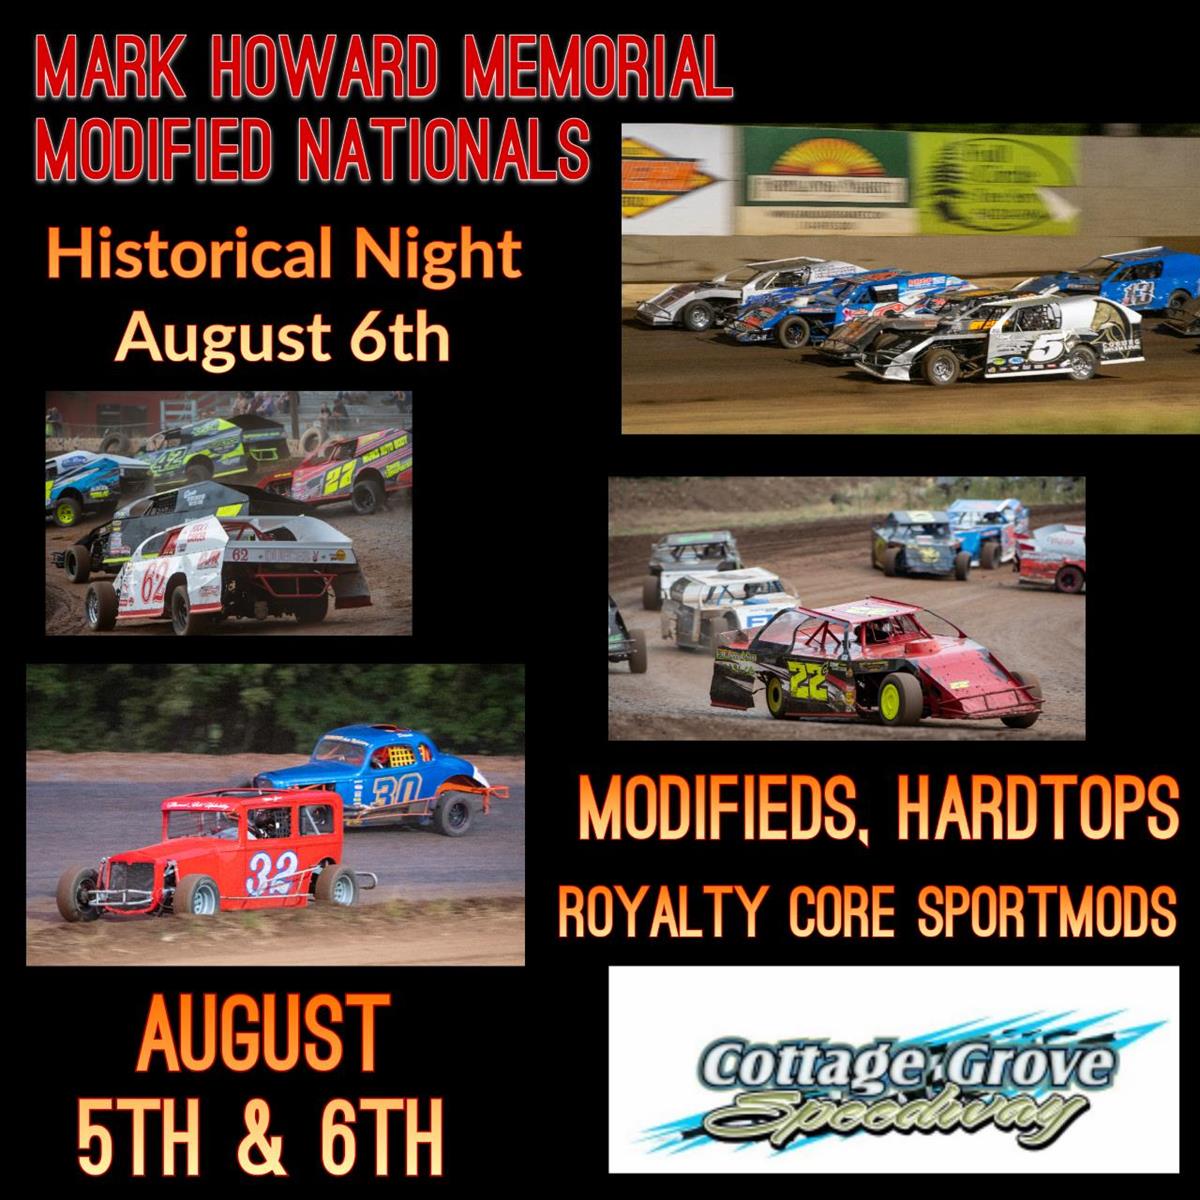 2 EVENTS COLLIDE AGAIN THIS WEEKEND FOR ANOTHER HUGE 2 NIGHTS OF RACING AT COTTAGE GROVE SPEEDWAY!!